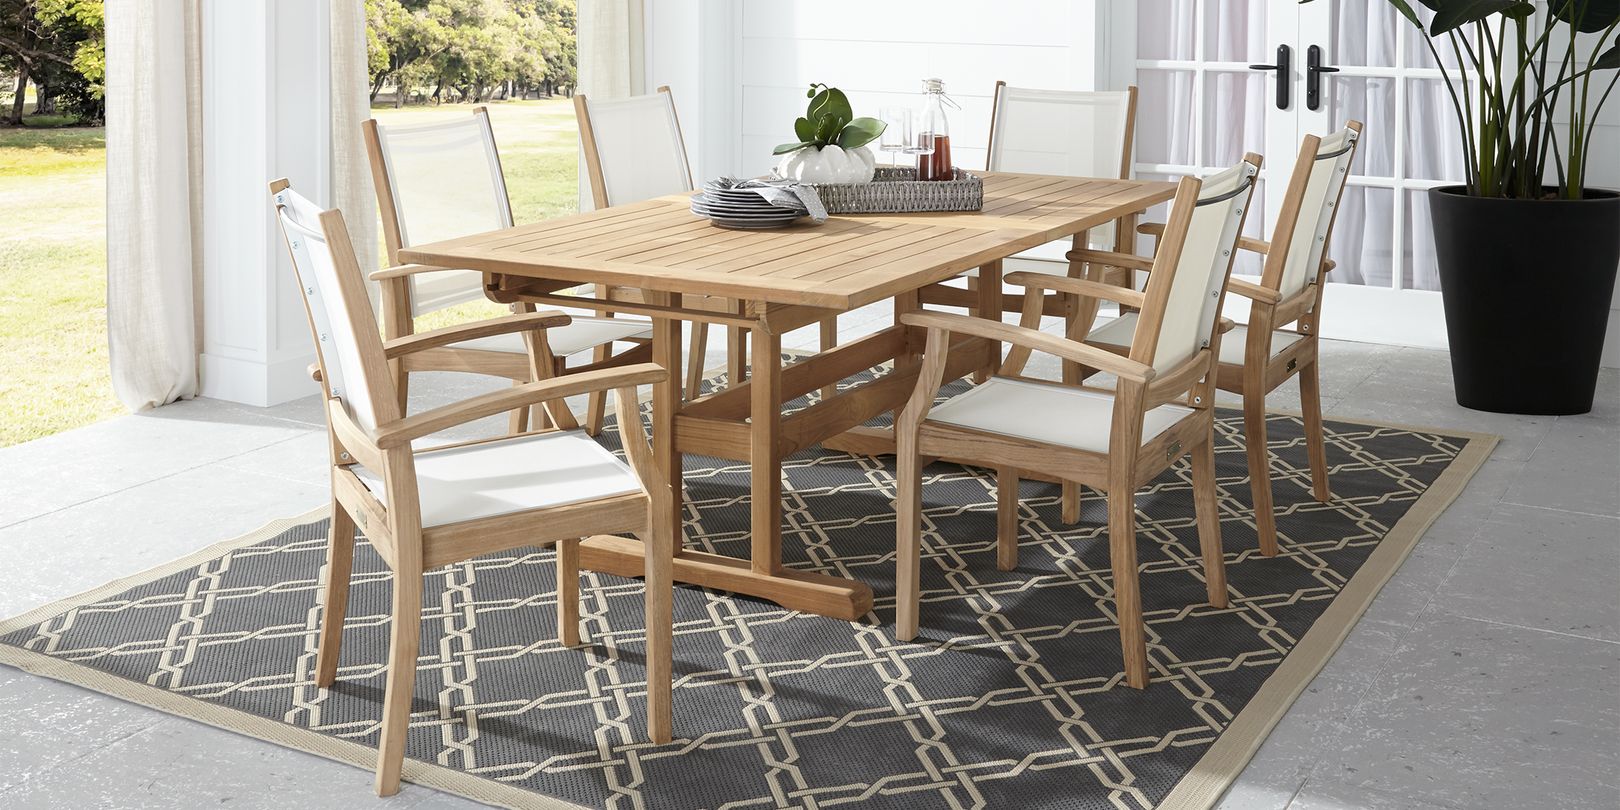 Photo of teak dining set with chairs